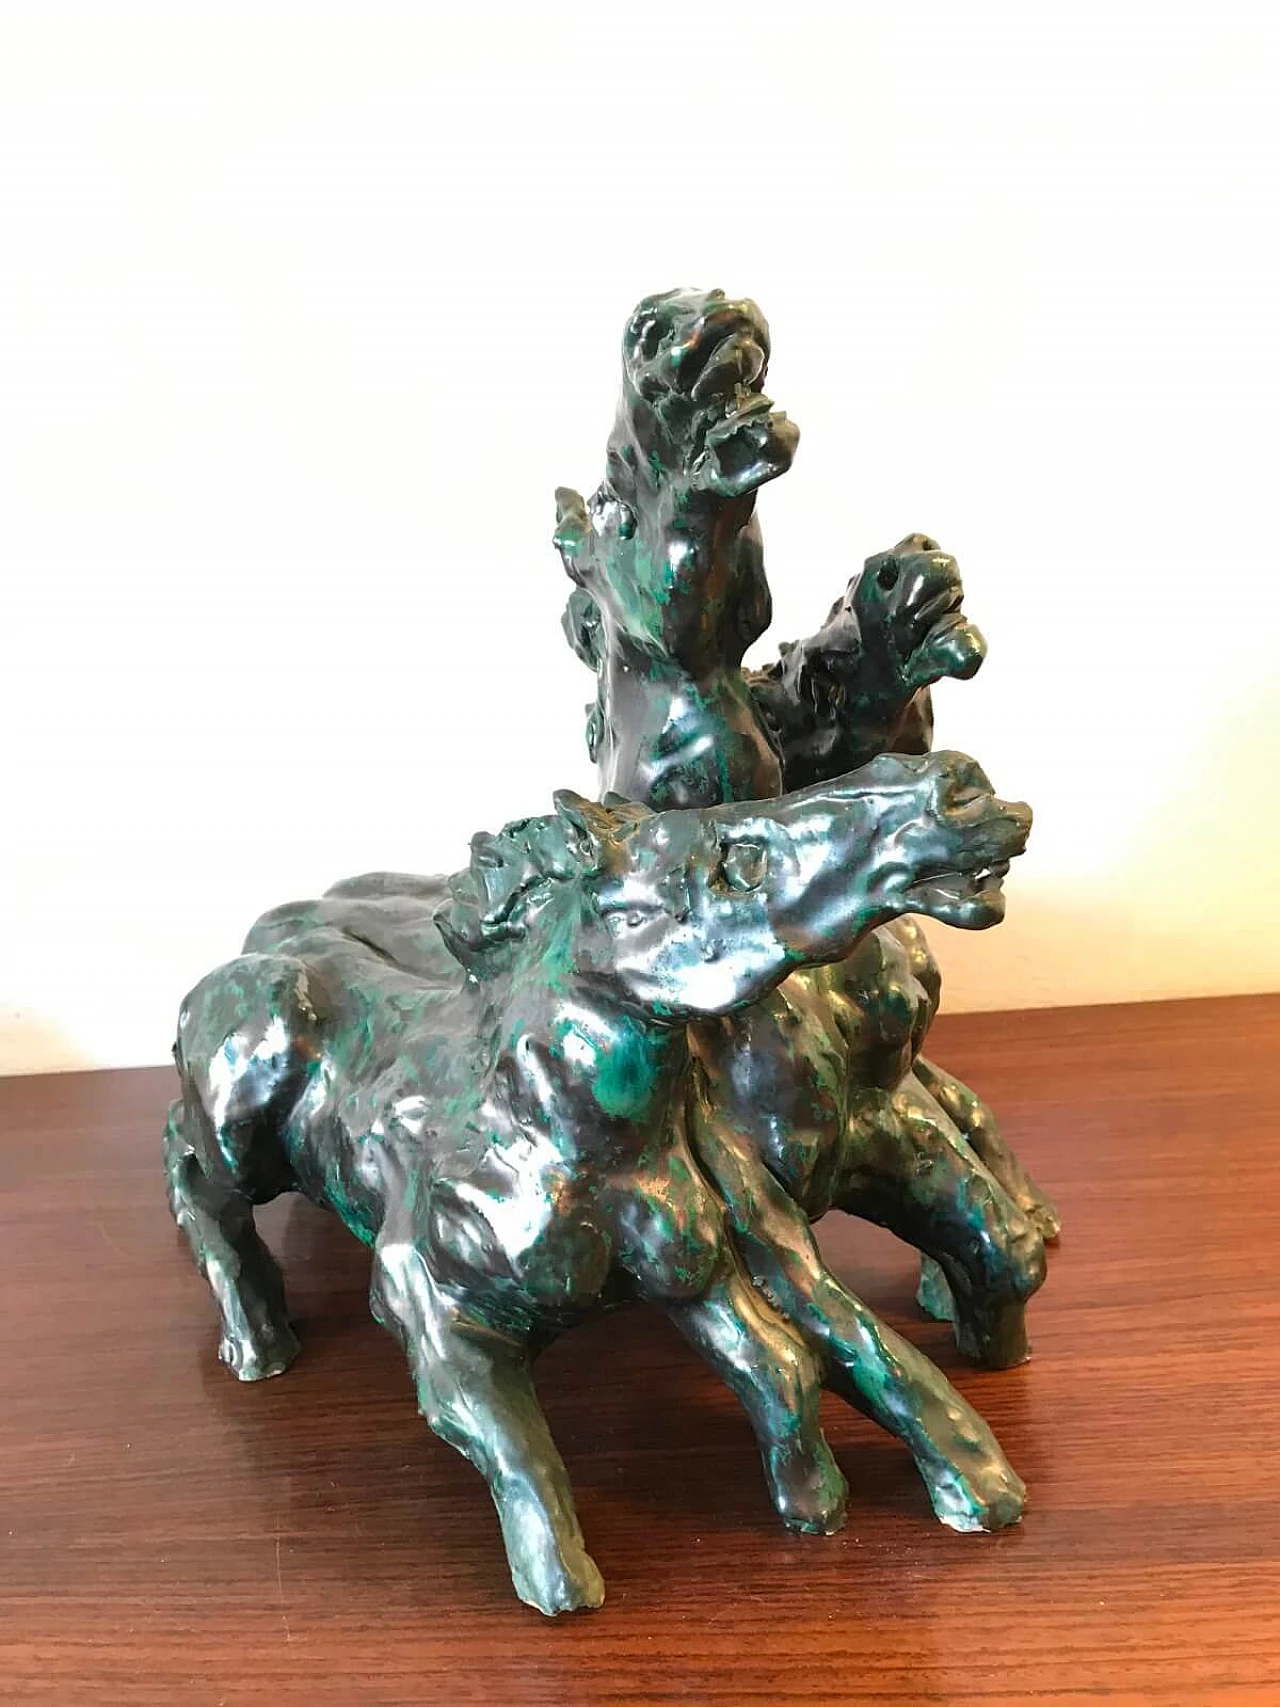 Sculpture by Umberto Ghersi with three ceramic horses 2